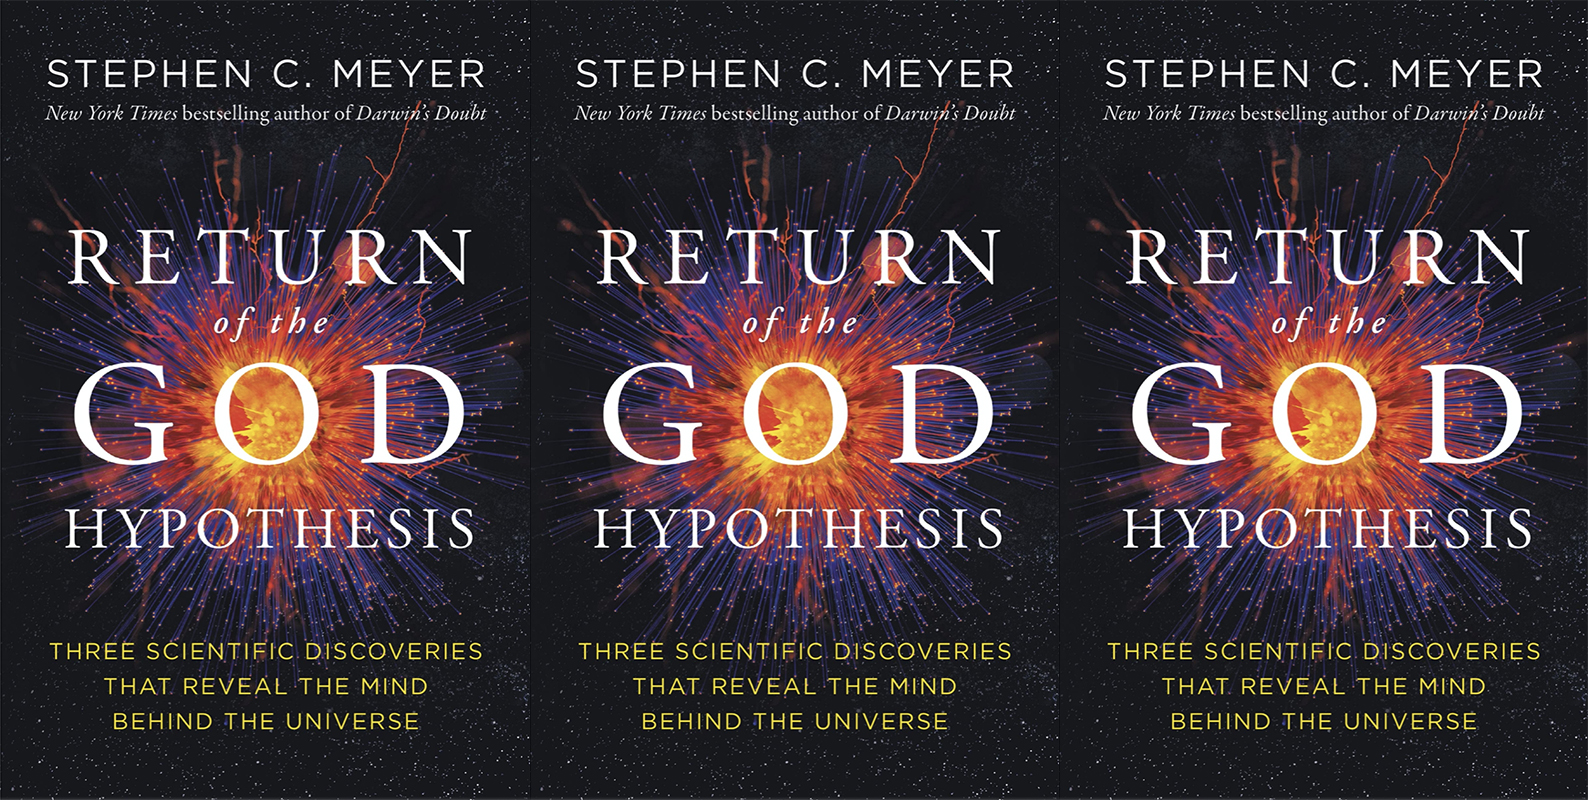 Return of the God Hypothesis covers